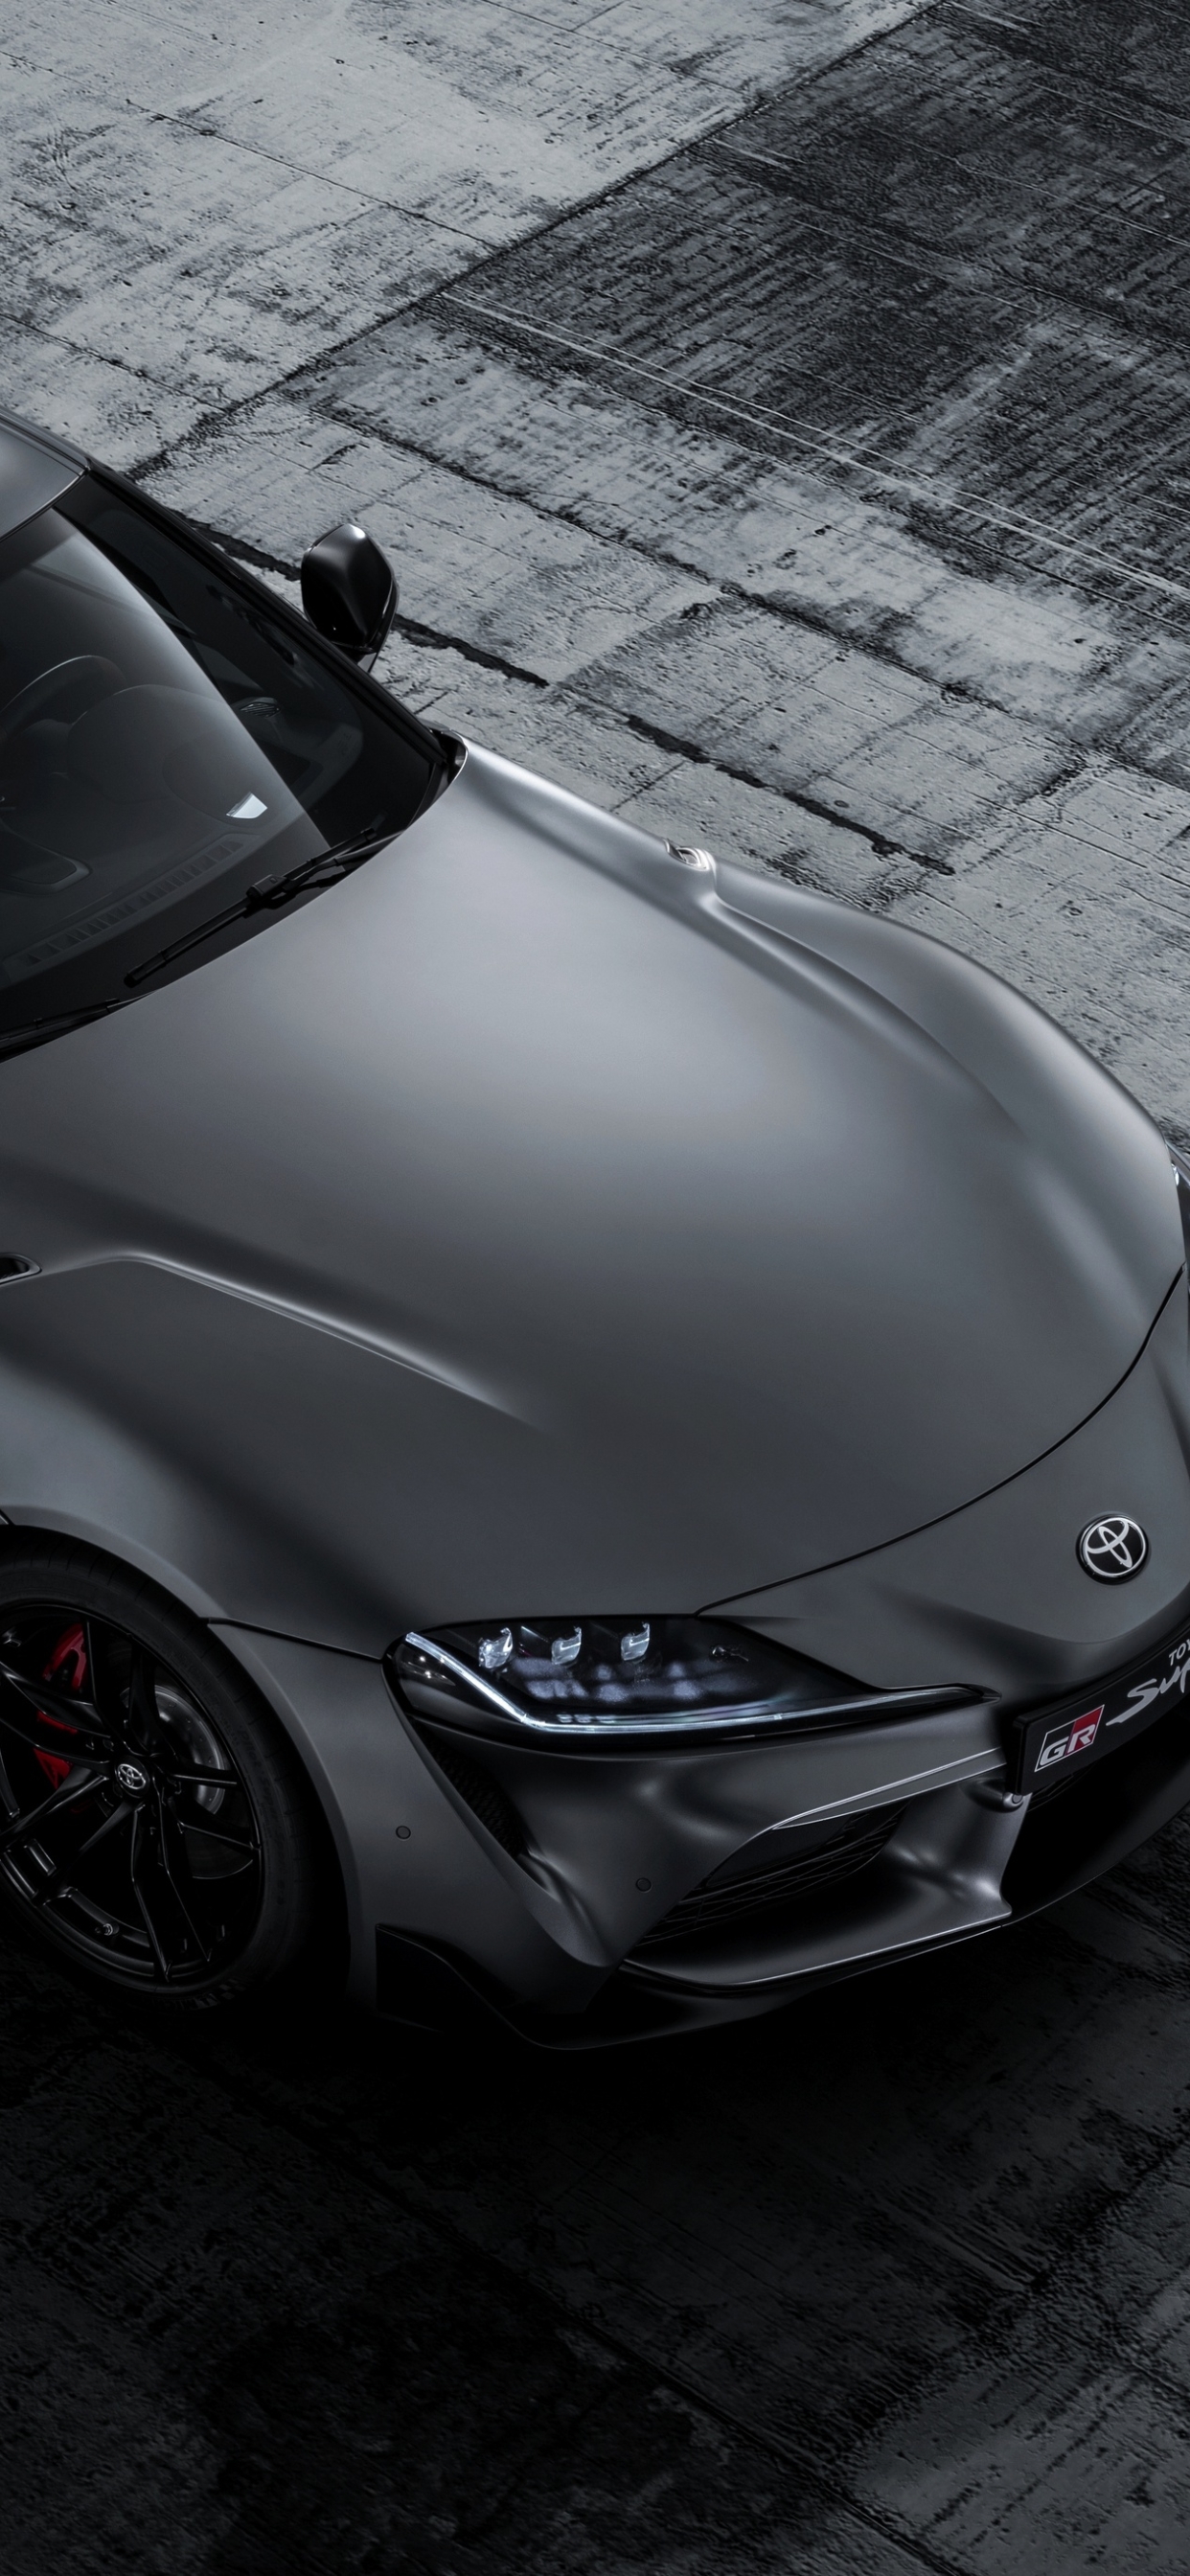 1242x26 Toyota Supra Iphone Xs Max Wallpaper Hd Cars 4k Wallpapers Images Photos And Background